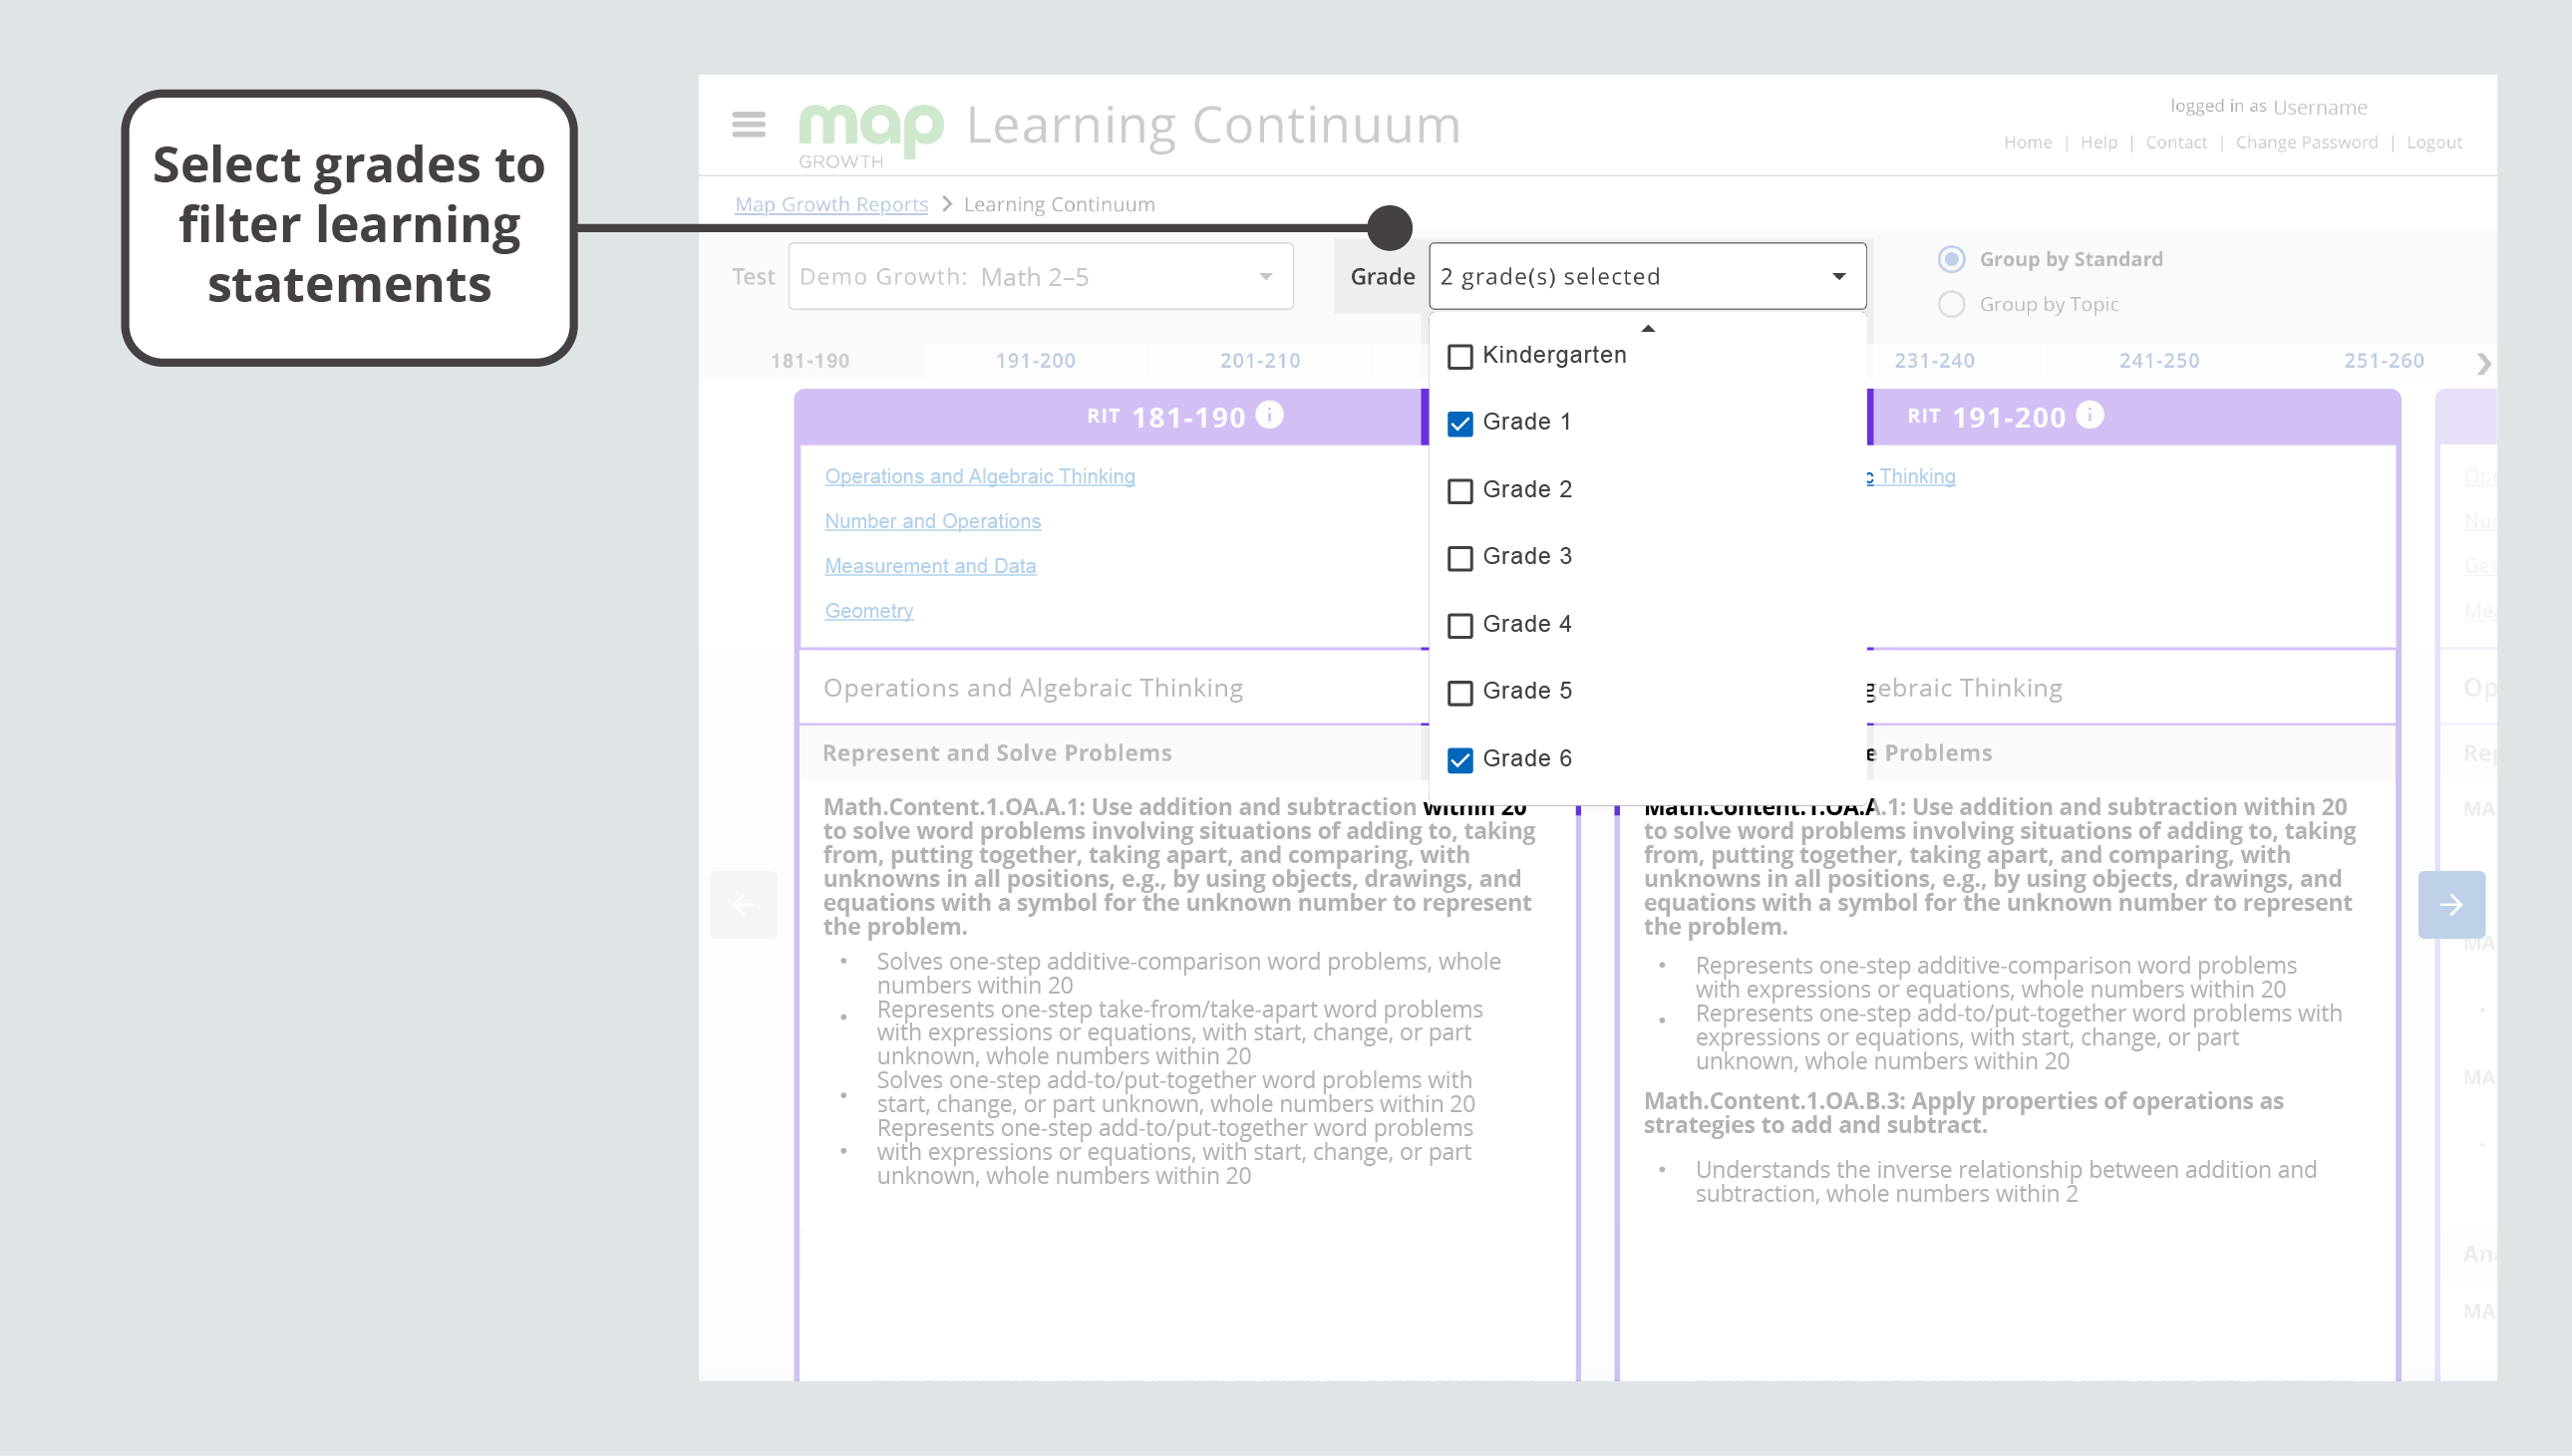 Filter the learning statements by selecting the grades from the drop-down menu.